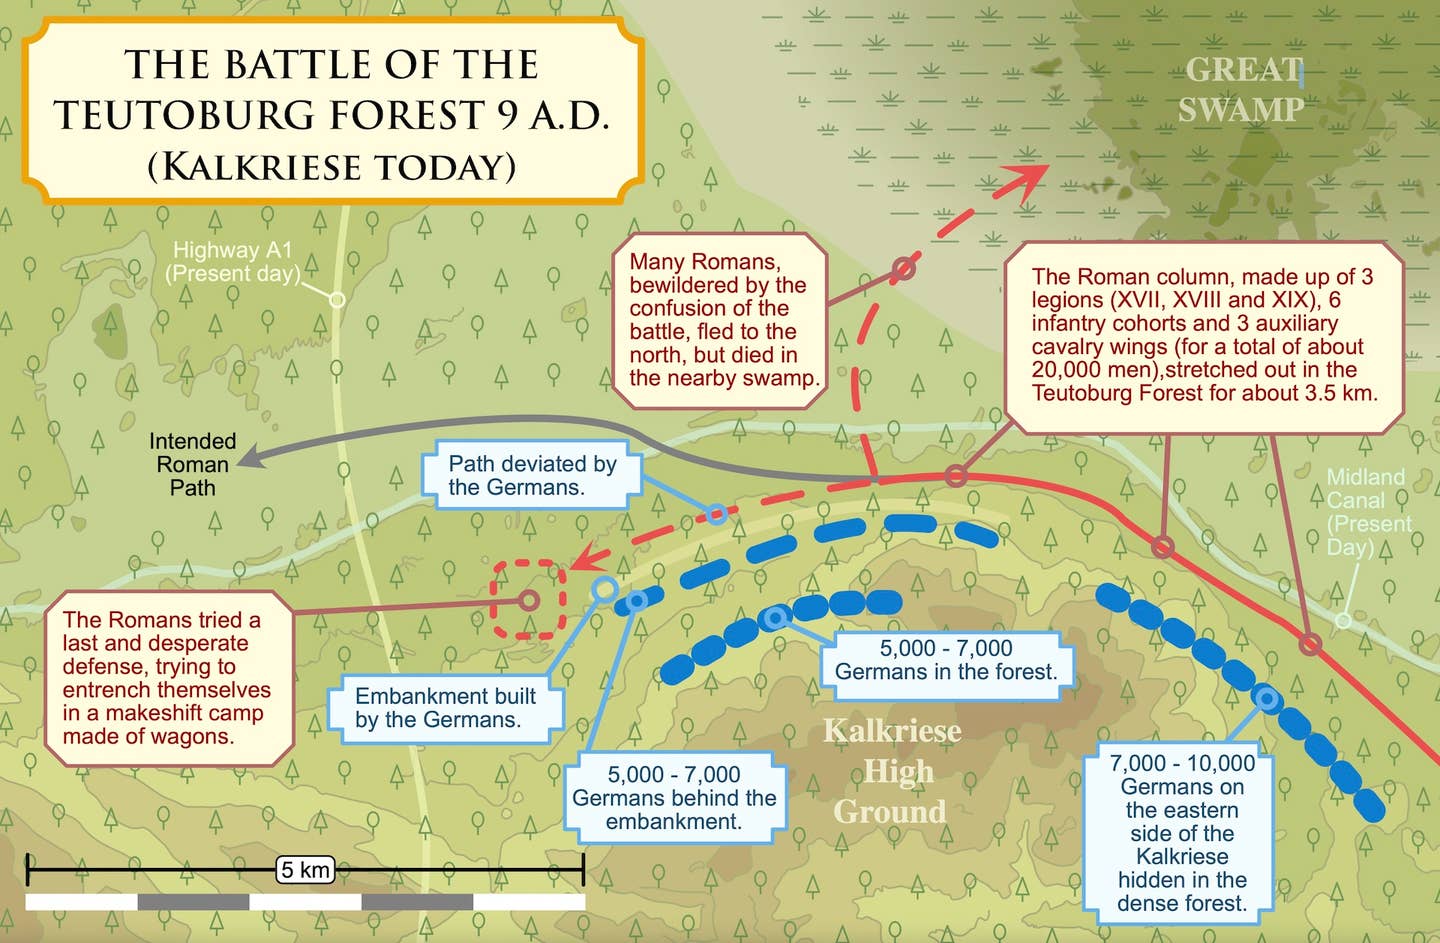 Map showing the defeat of Publius Quinctilius Varus in the Teutoburg Forest, 9 AD. Topographic information based on present-day data. <em>Skaalr via Wikimedia Commons</em>